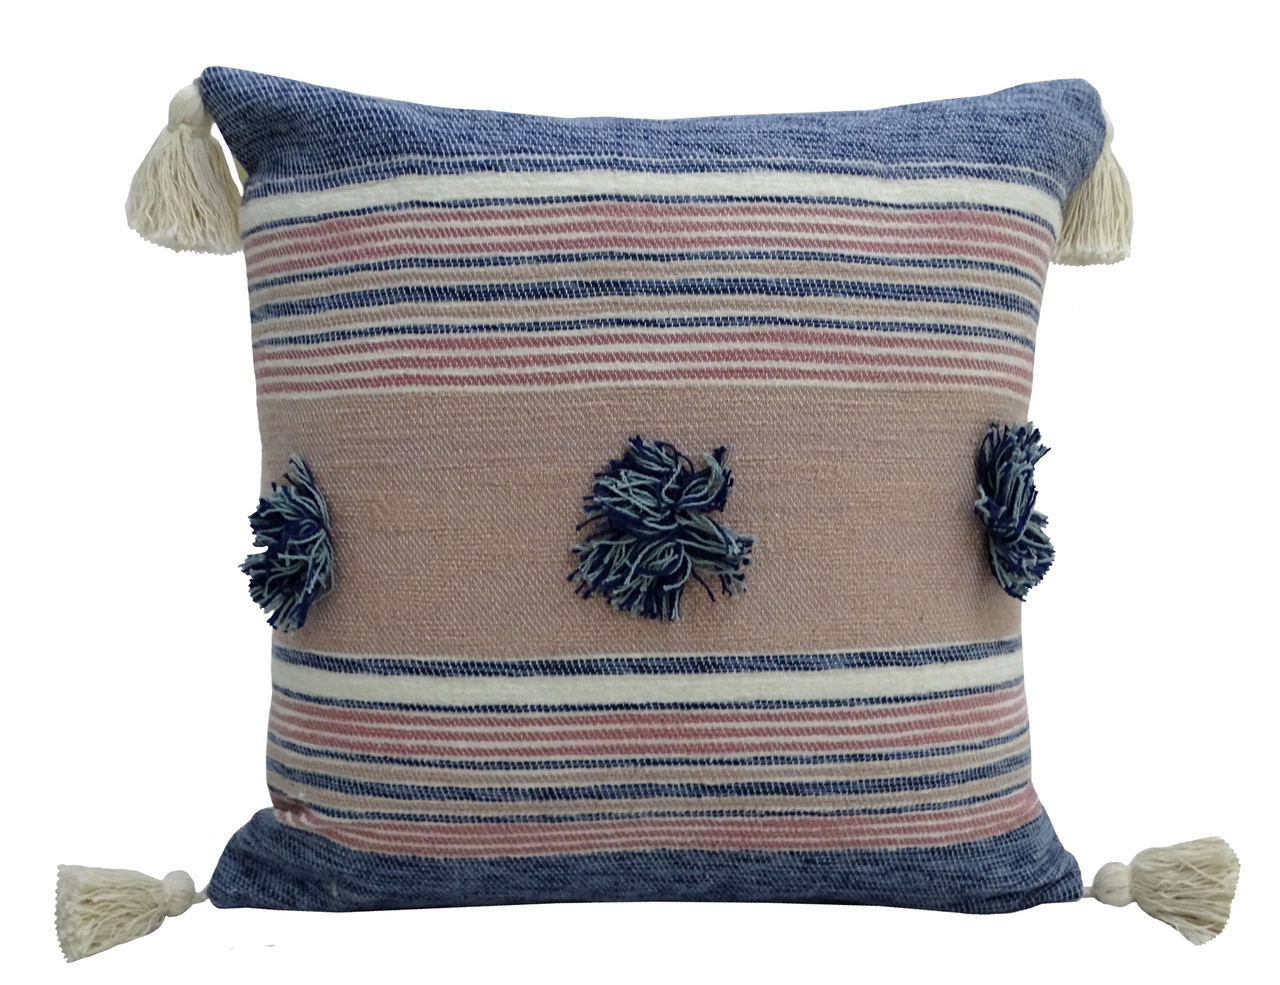 20" x 20" Throw Pillow with Tassels and Pom-Poms